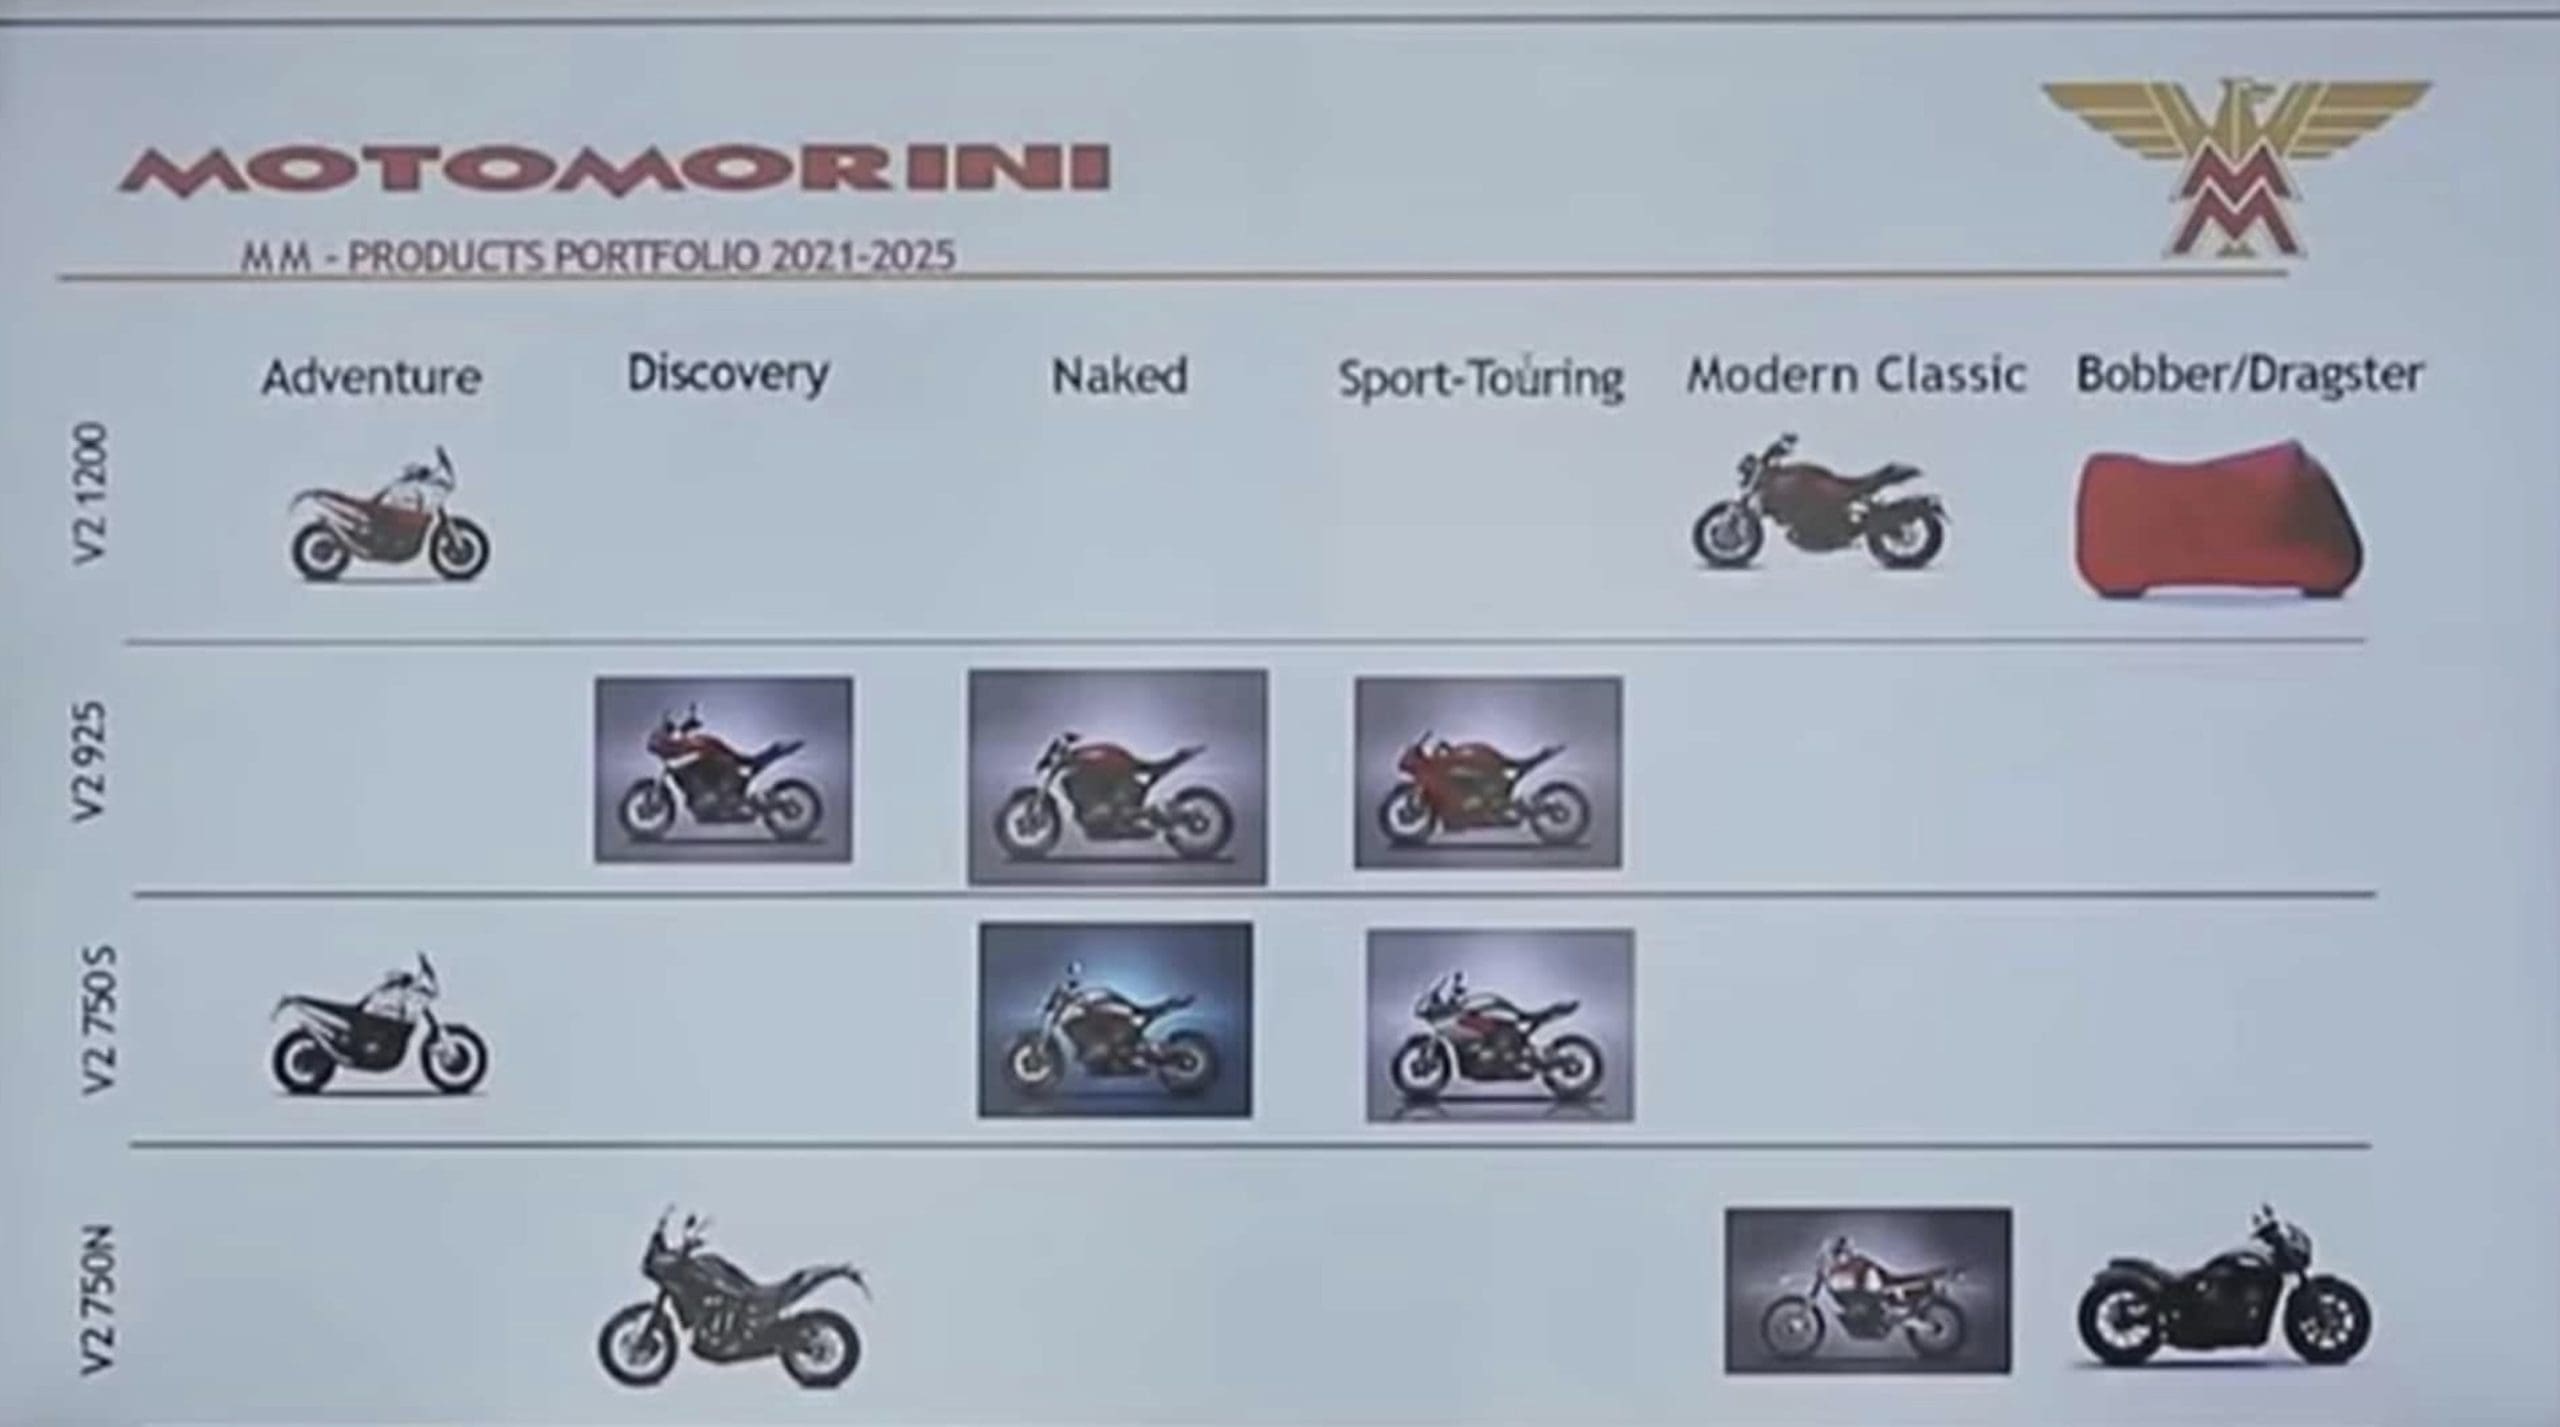 The "leaked slide" that was purportedly shown in an interview with Motorrad provides great excitement, though little actual detail on what's being debuted, and when. Media sourced from RideApart. 